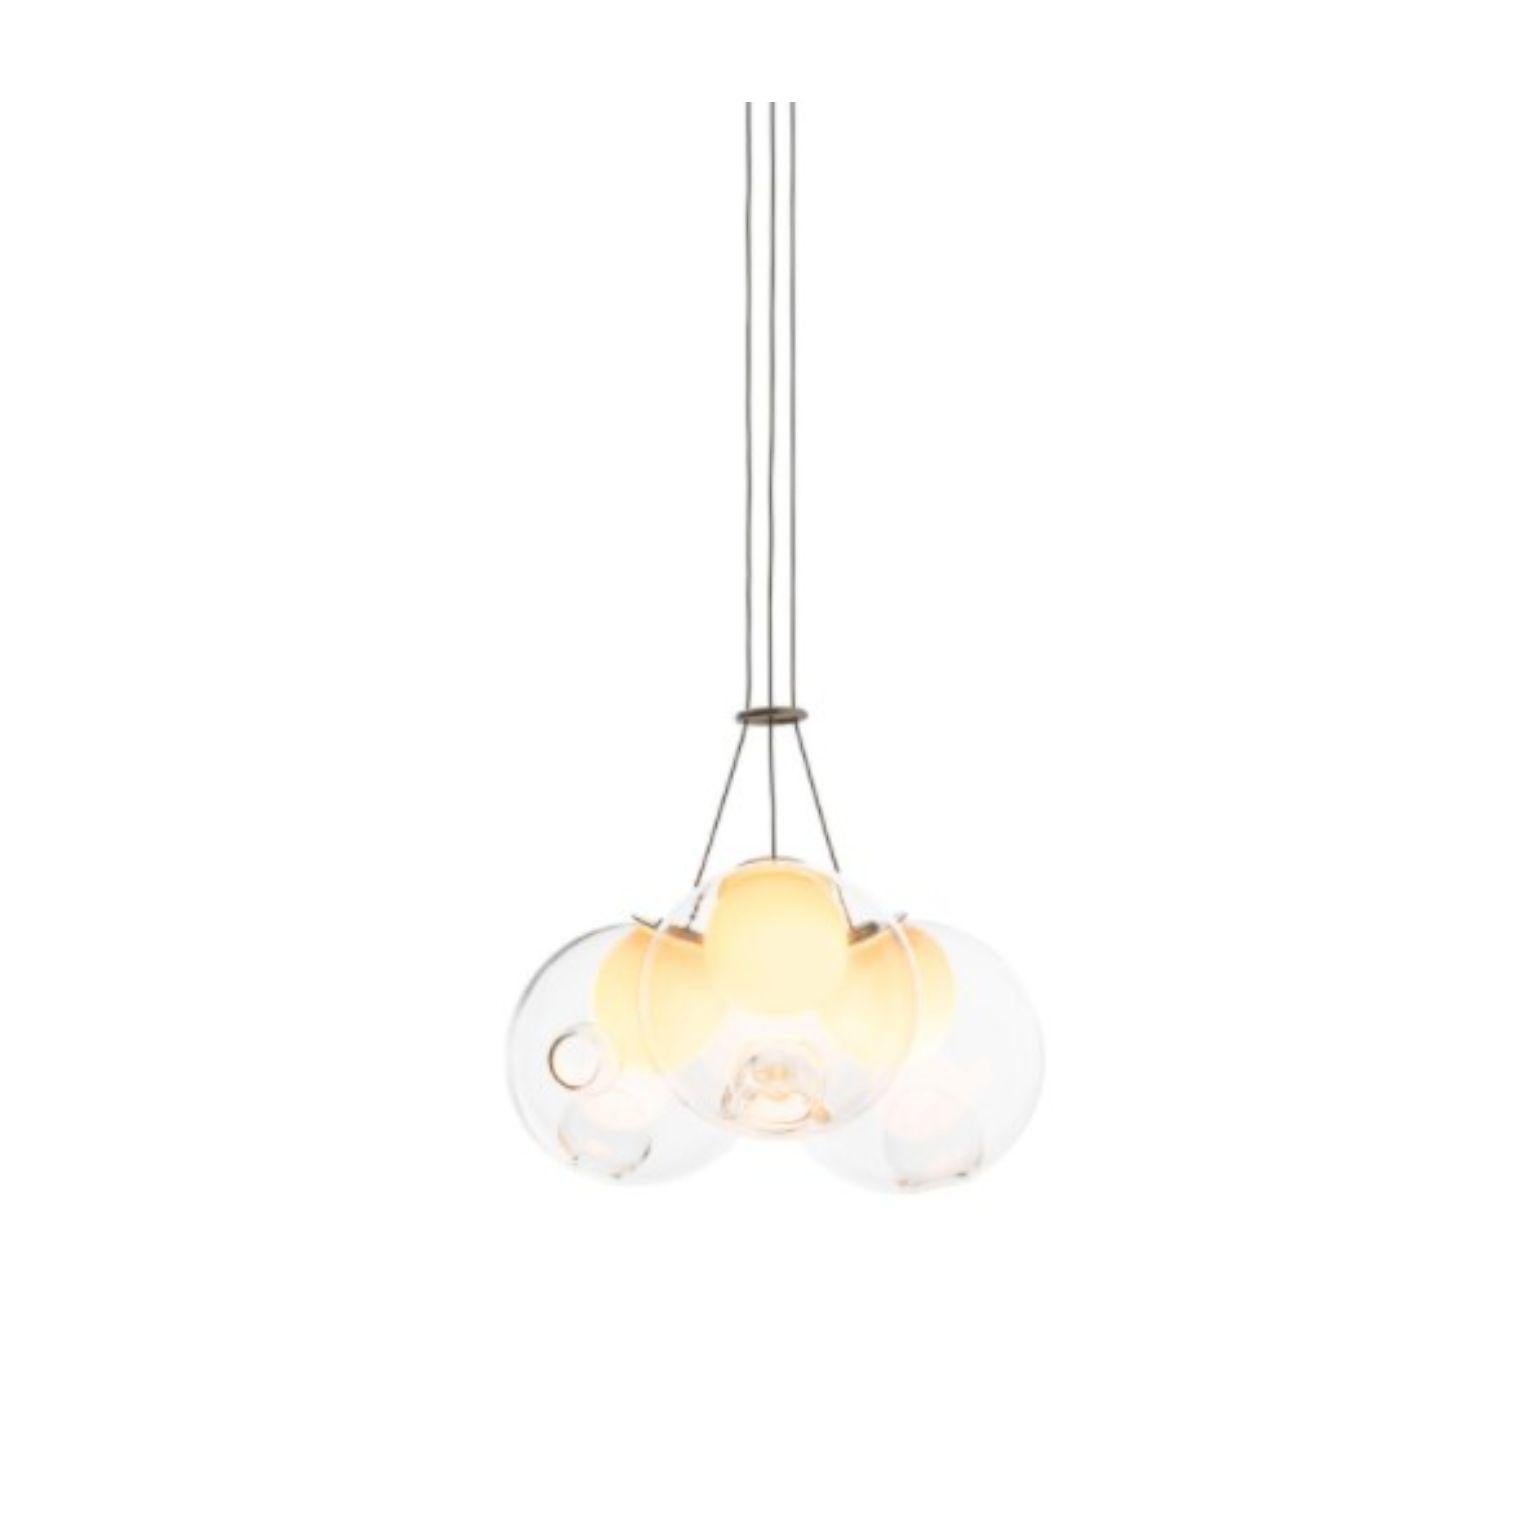 28.3 pendant by Bocci
Dimensions: D 15.2 x H 300 cm
Materials: white powder coated round canopy
Weight: 3.5 kg
Also available in different dimensions.
All our lamps can be wired according to each country. If sold to the USA it will be wired for